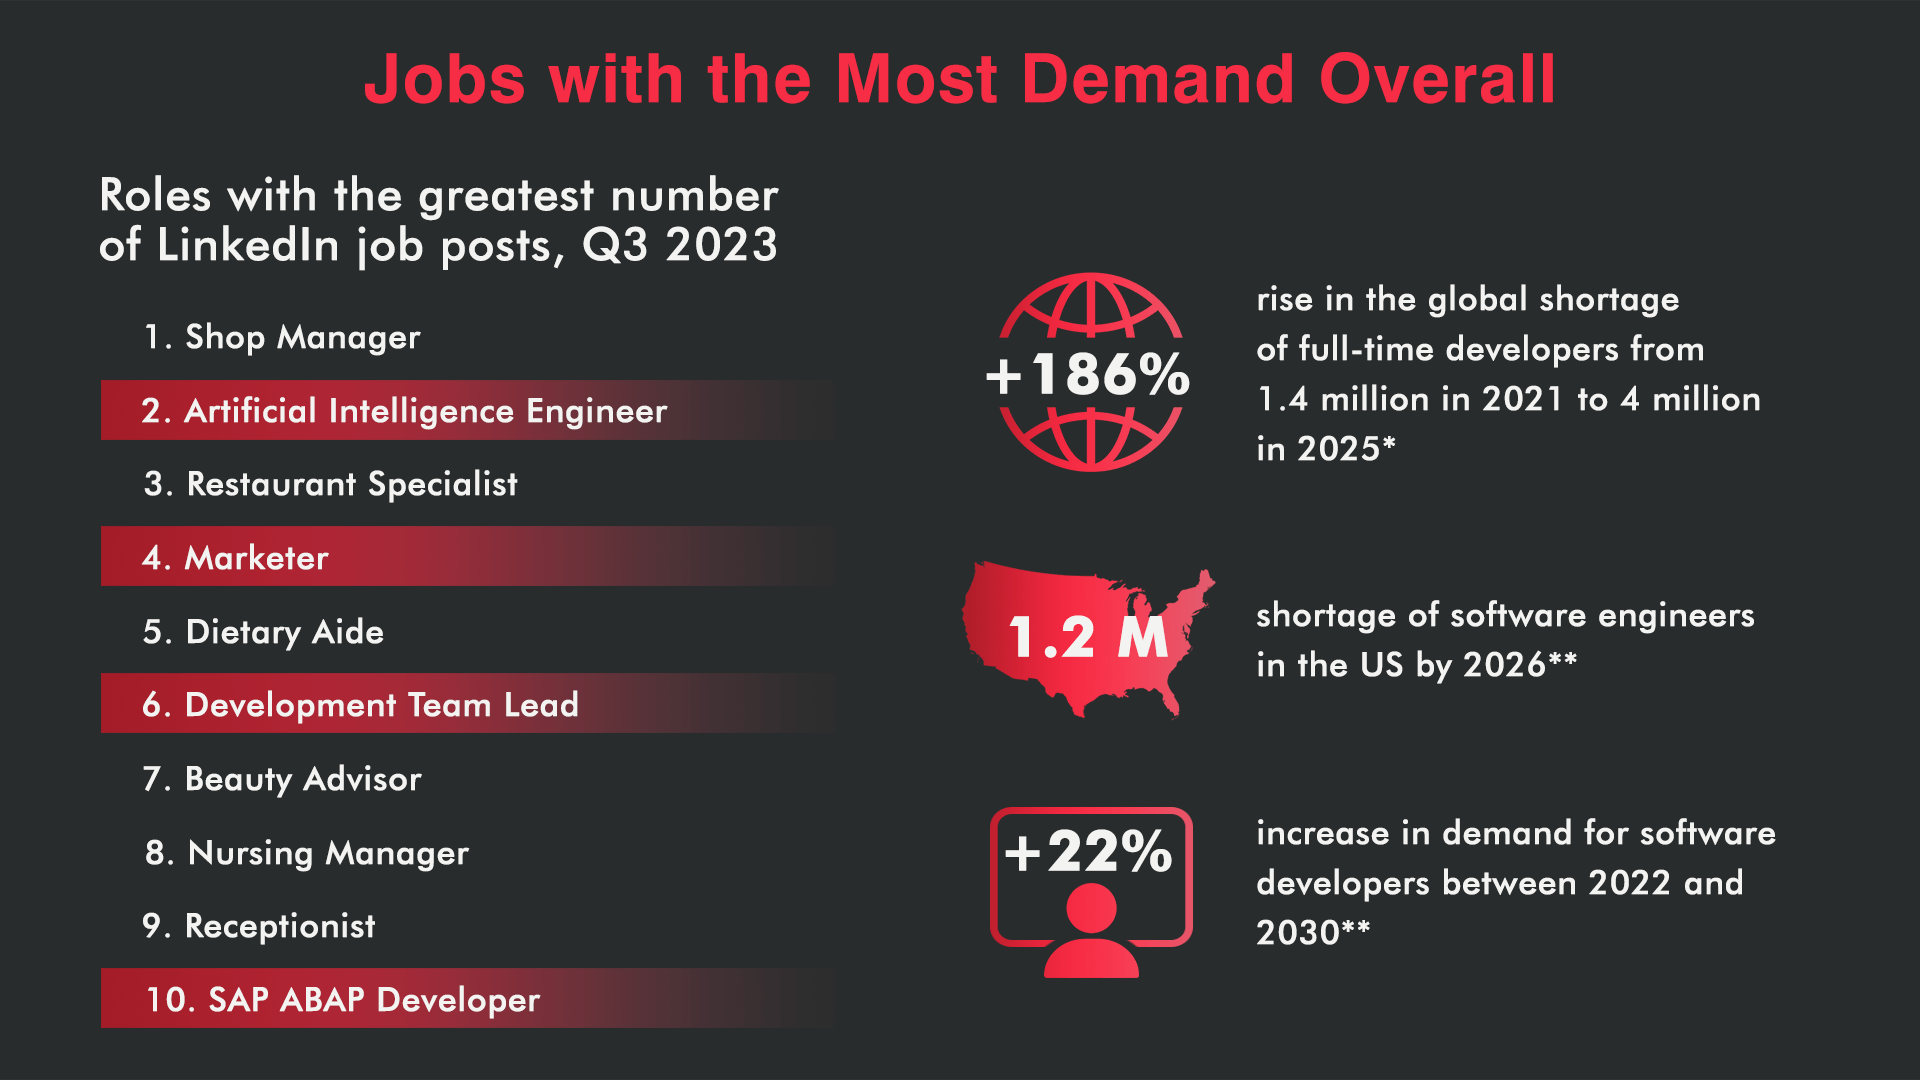 Jobs with the Most Demand Overall